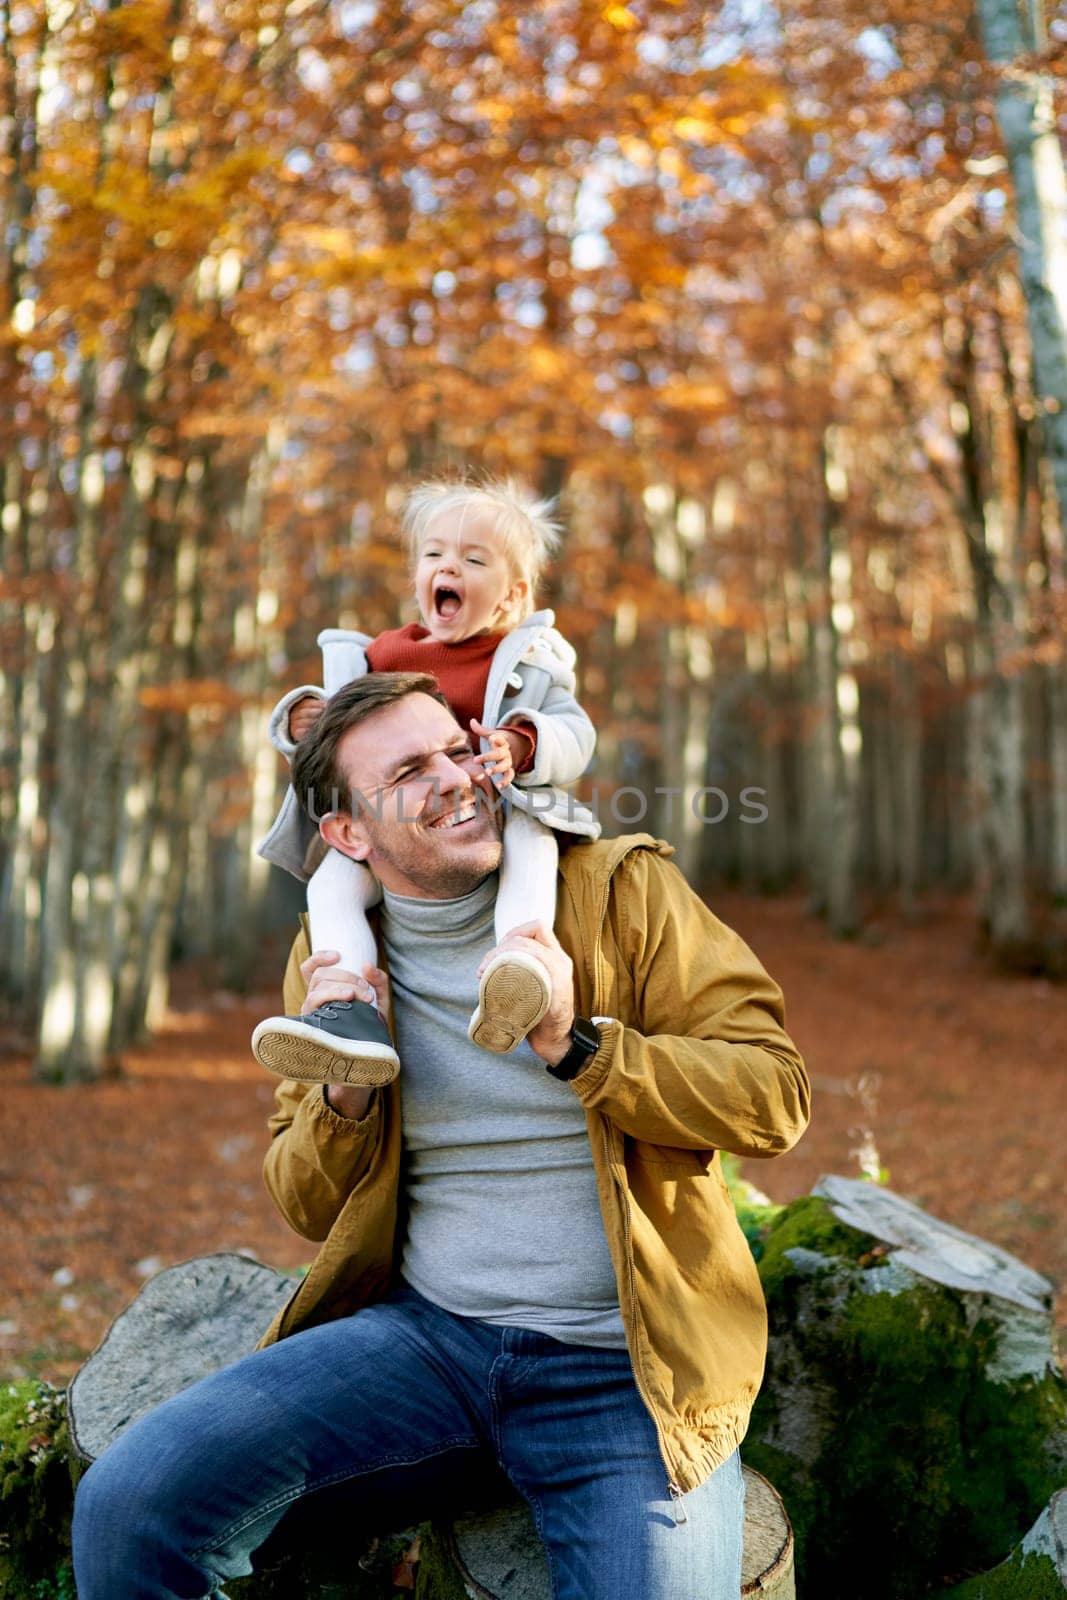 Little smiling girl sits on her dad shoulders touching his face with her hands in the autumn forest by Nadtochiy